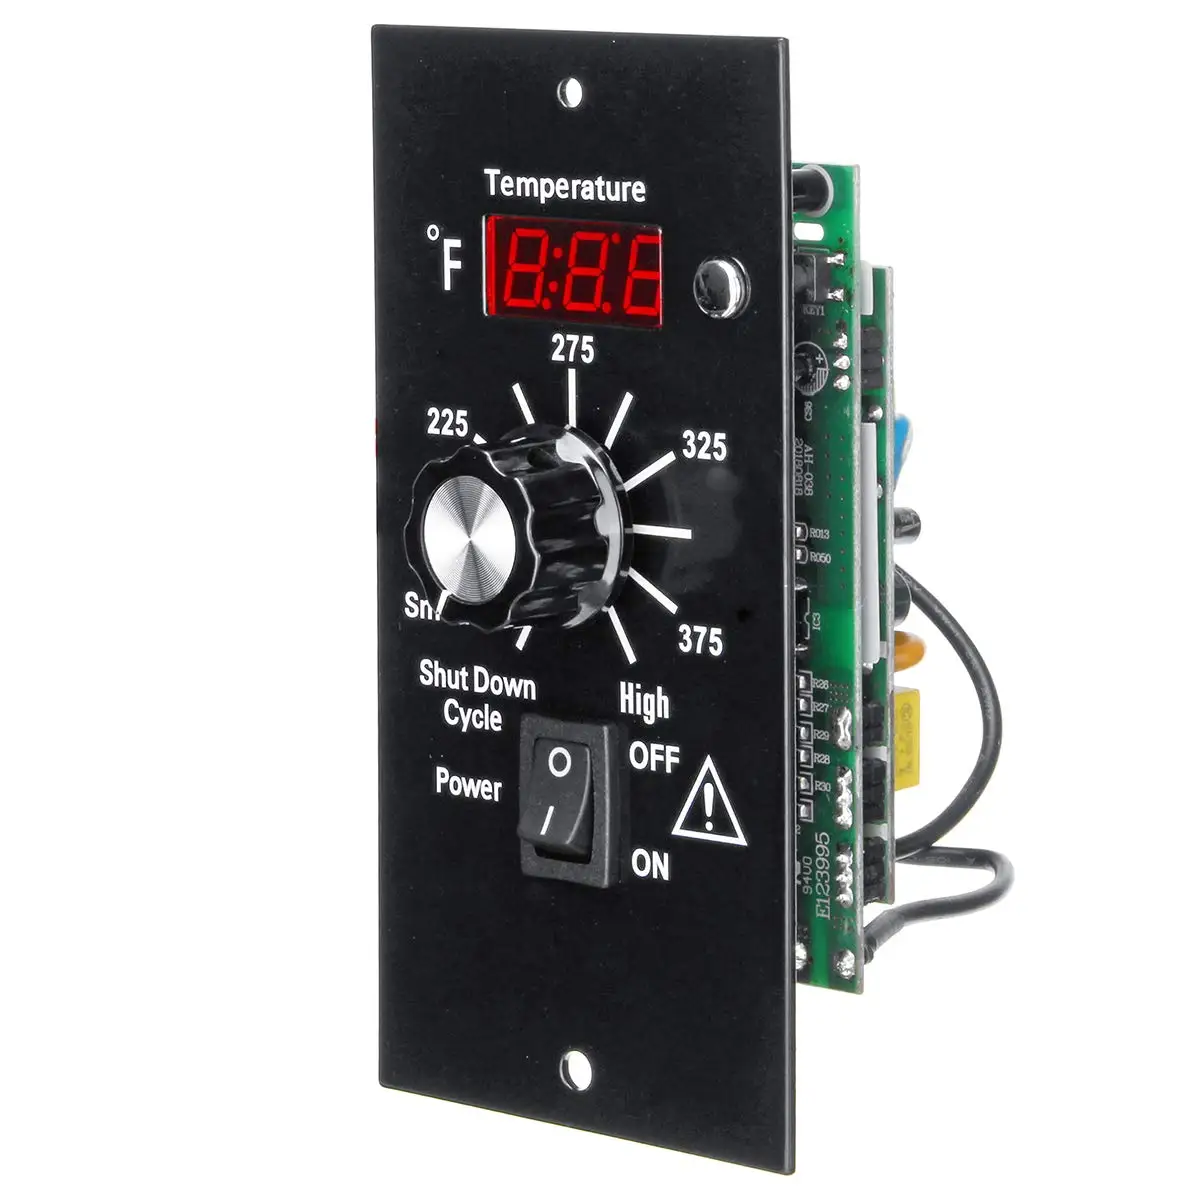 Replacement Digital Thermostat Controller Board For Traeger Wood Pellet Grill S